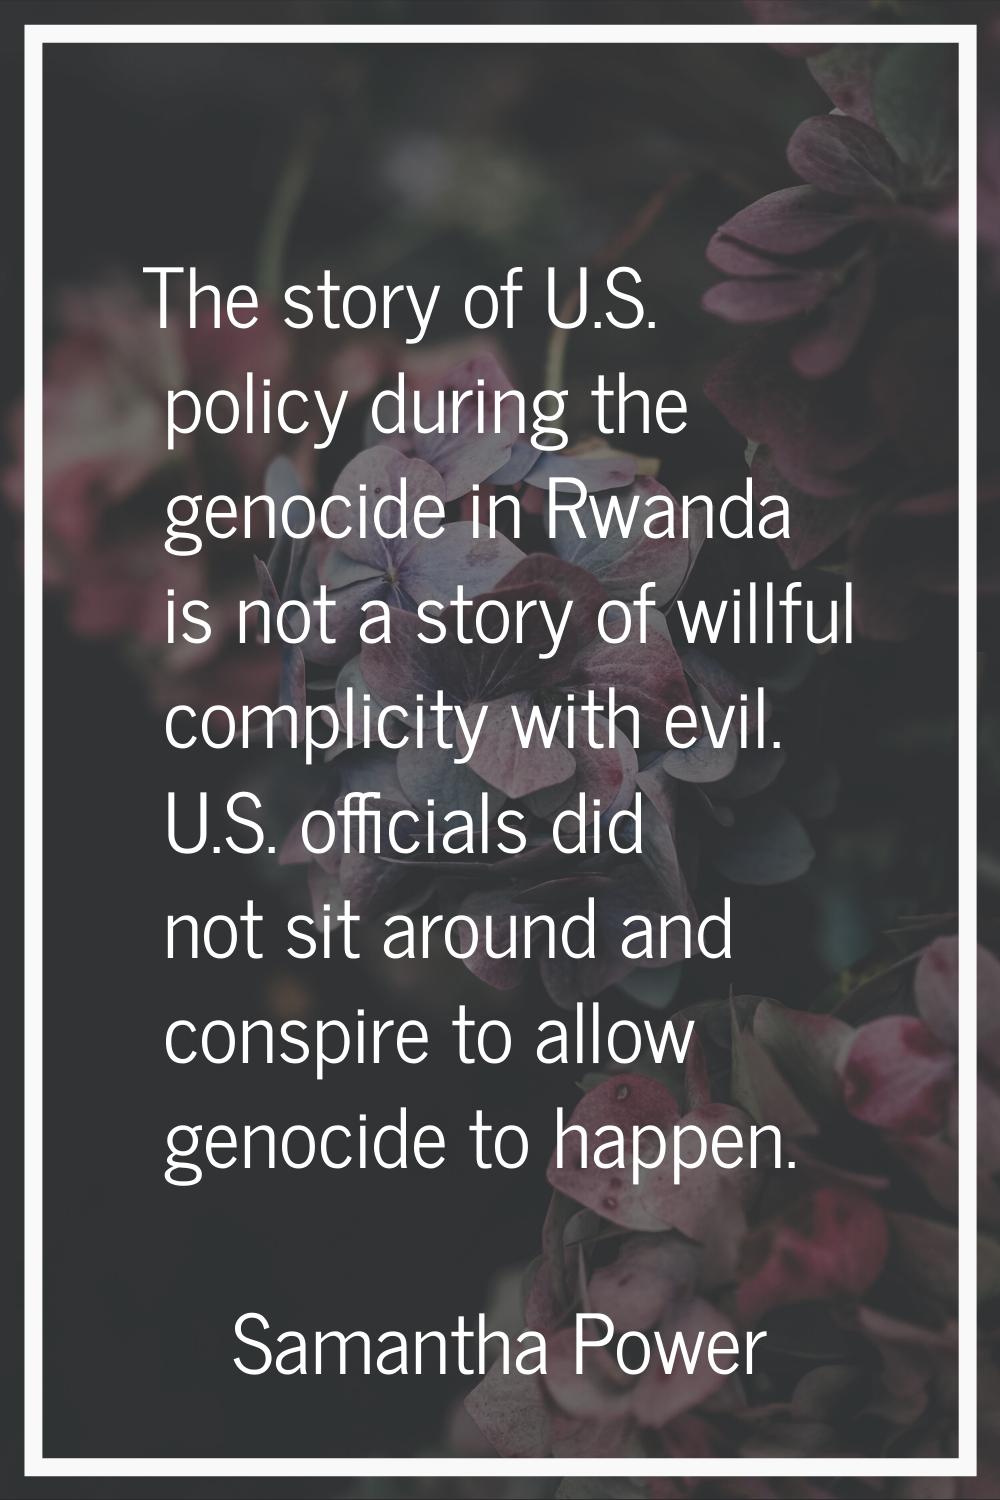 The story of U.S. policy during the genocide in Rwanda is not a story of willful complicity with ev